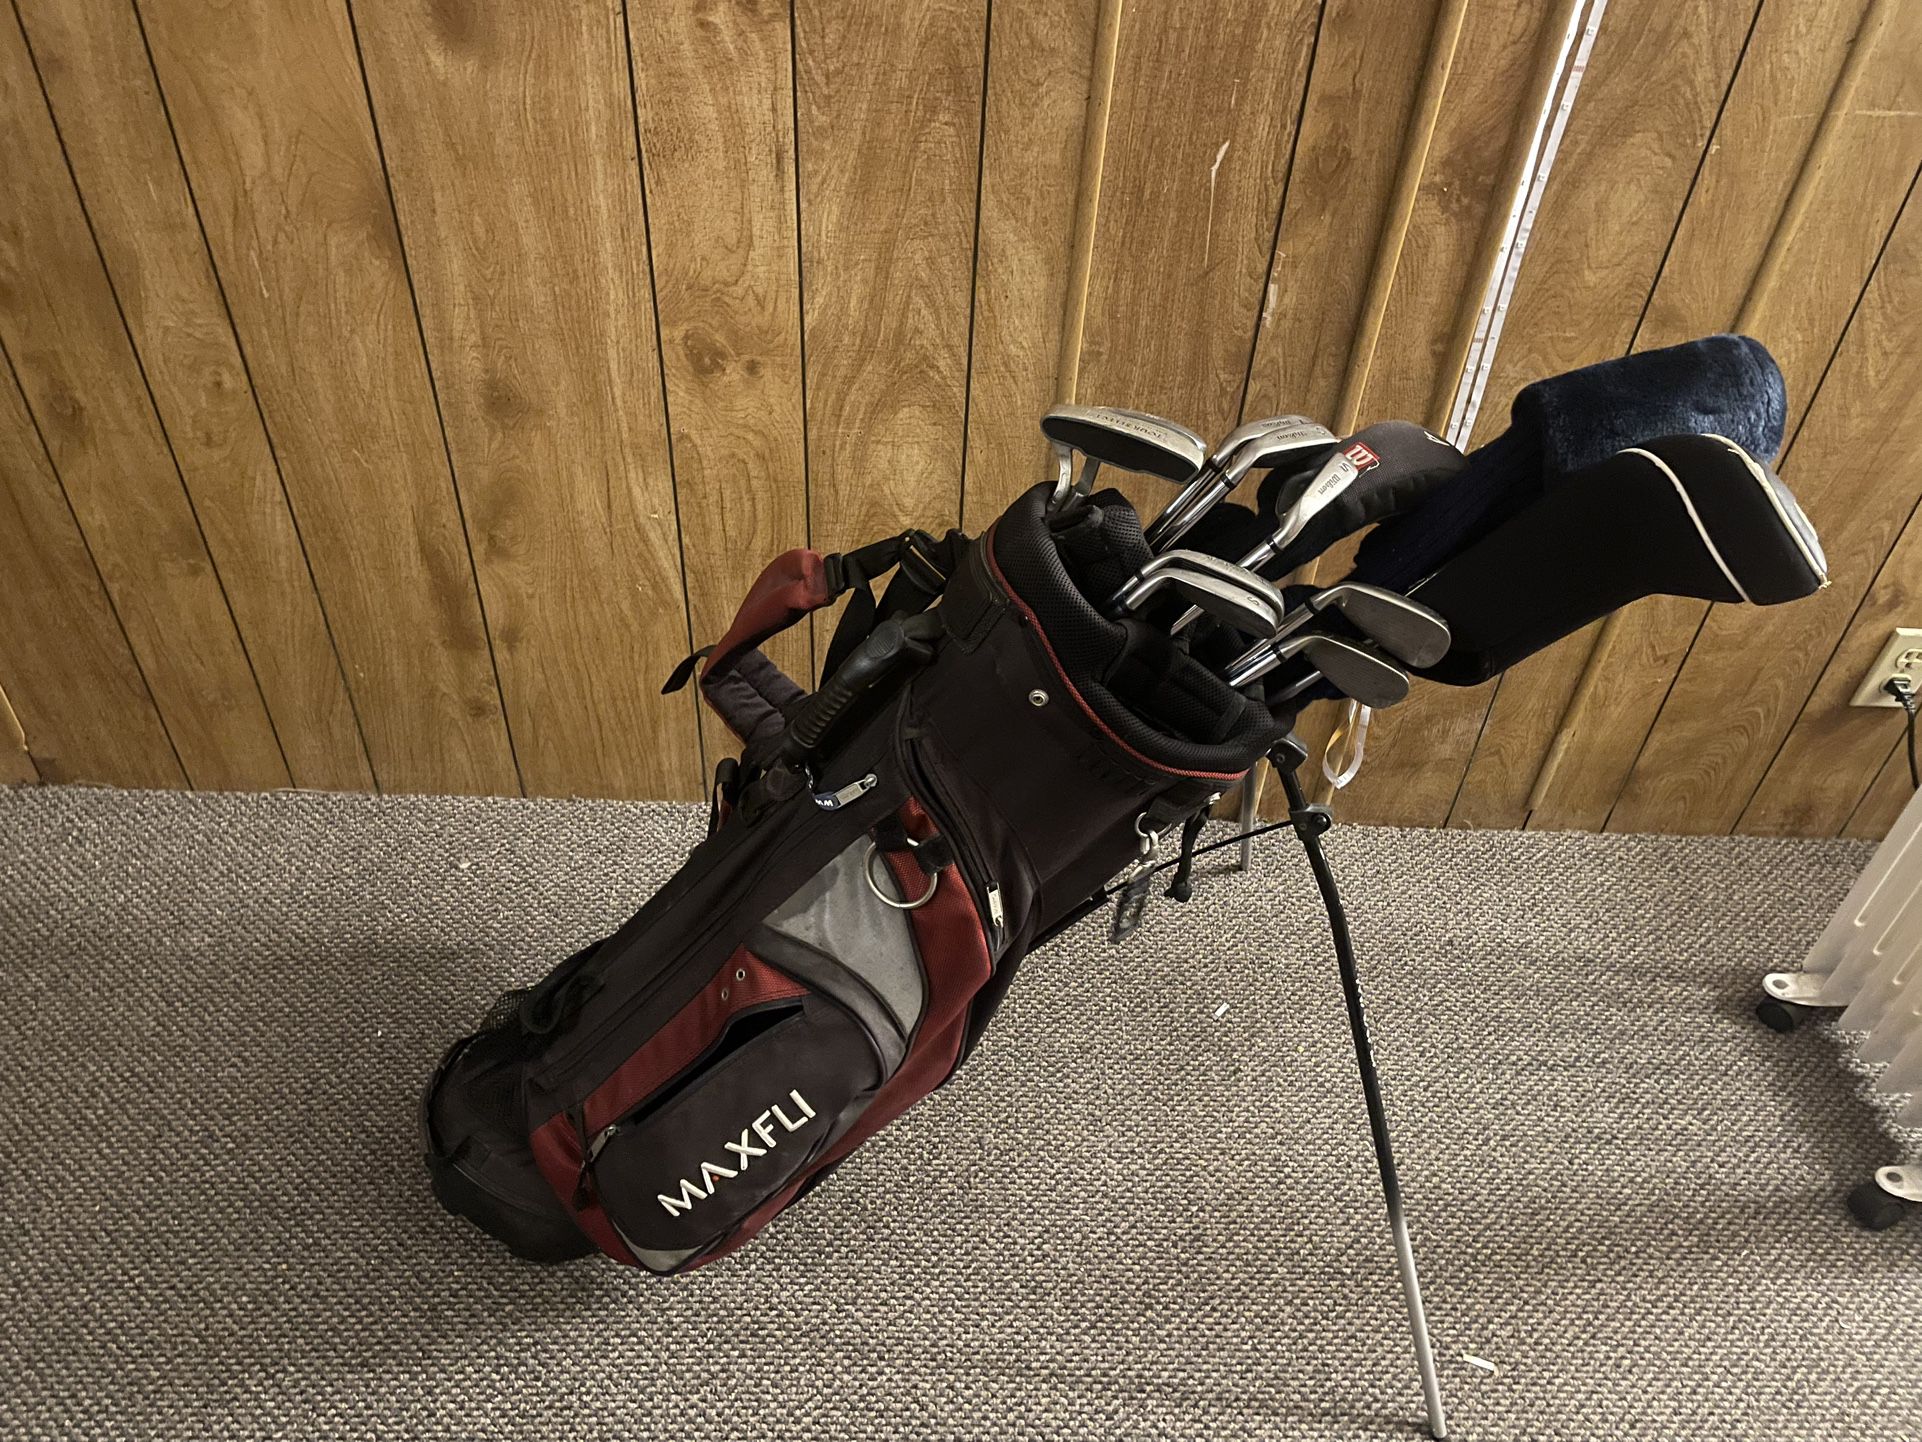 Wilson Fat Shaft W/Maxfli bag (will Deliver Up To 50 Miles)